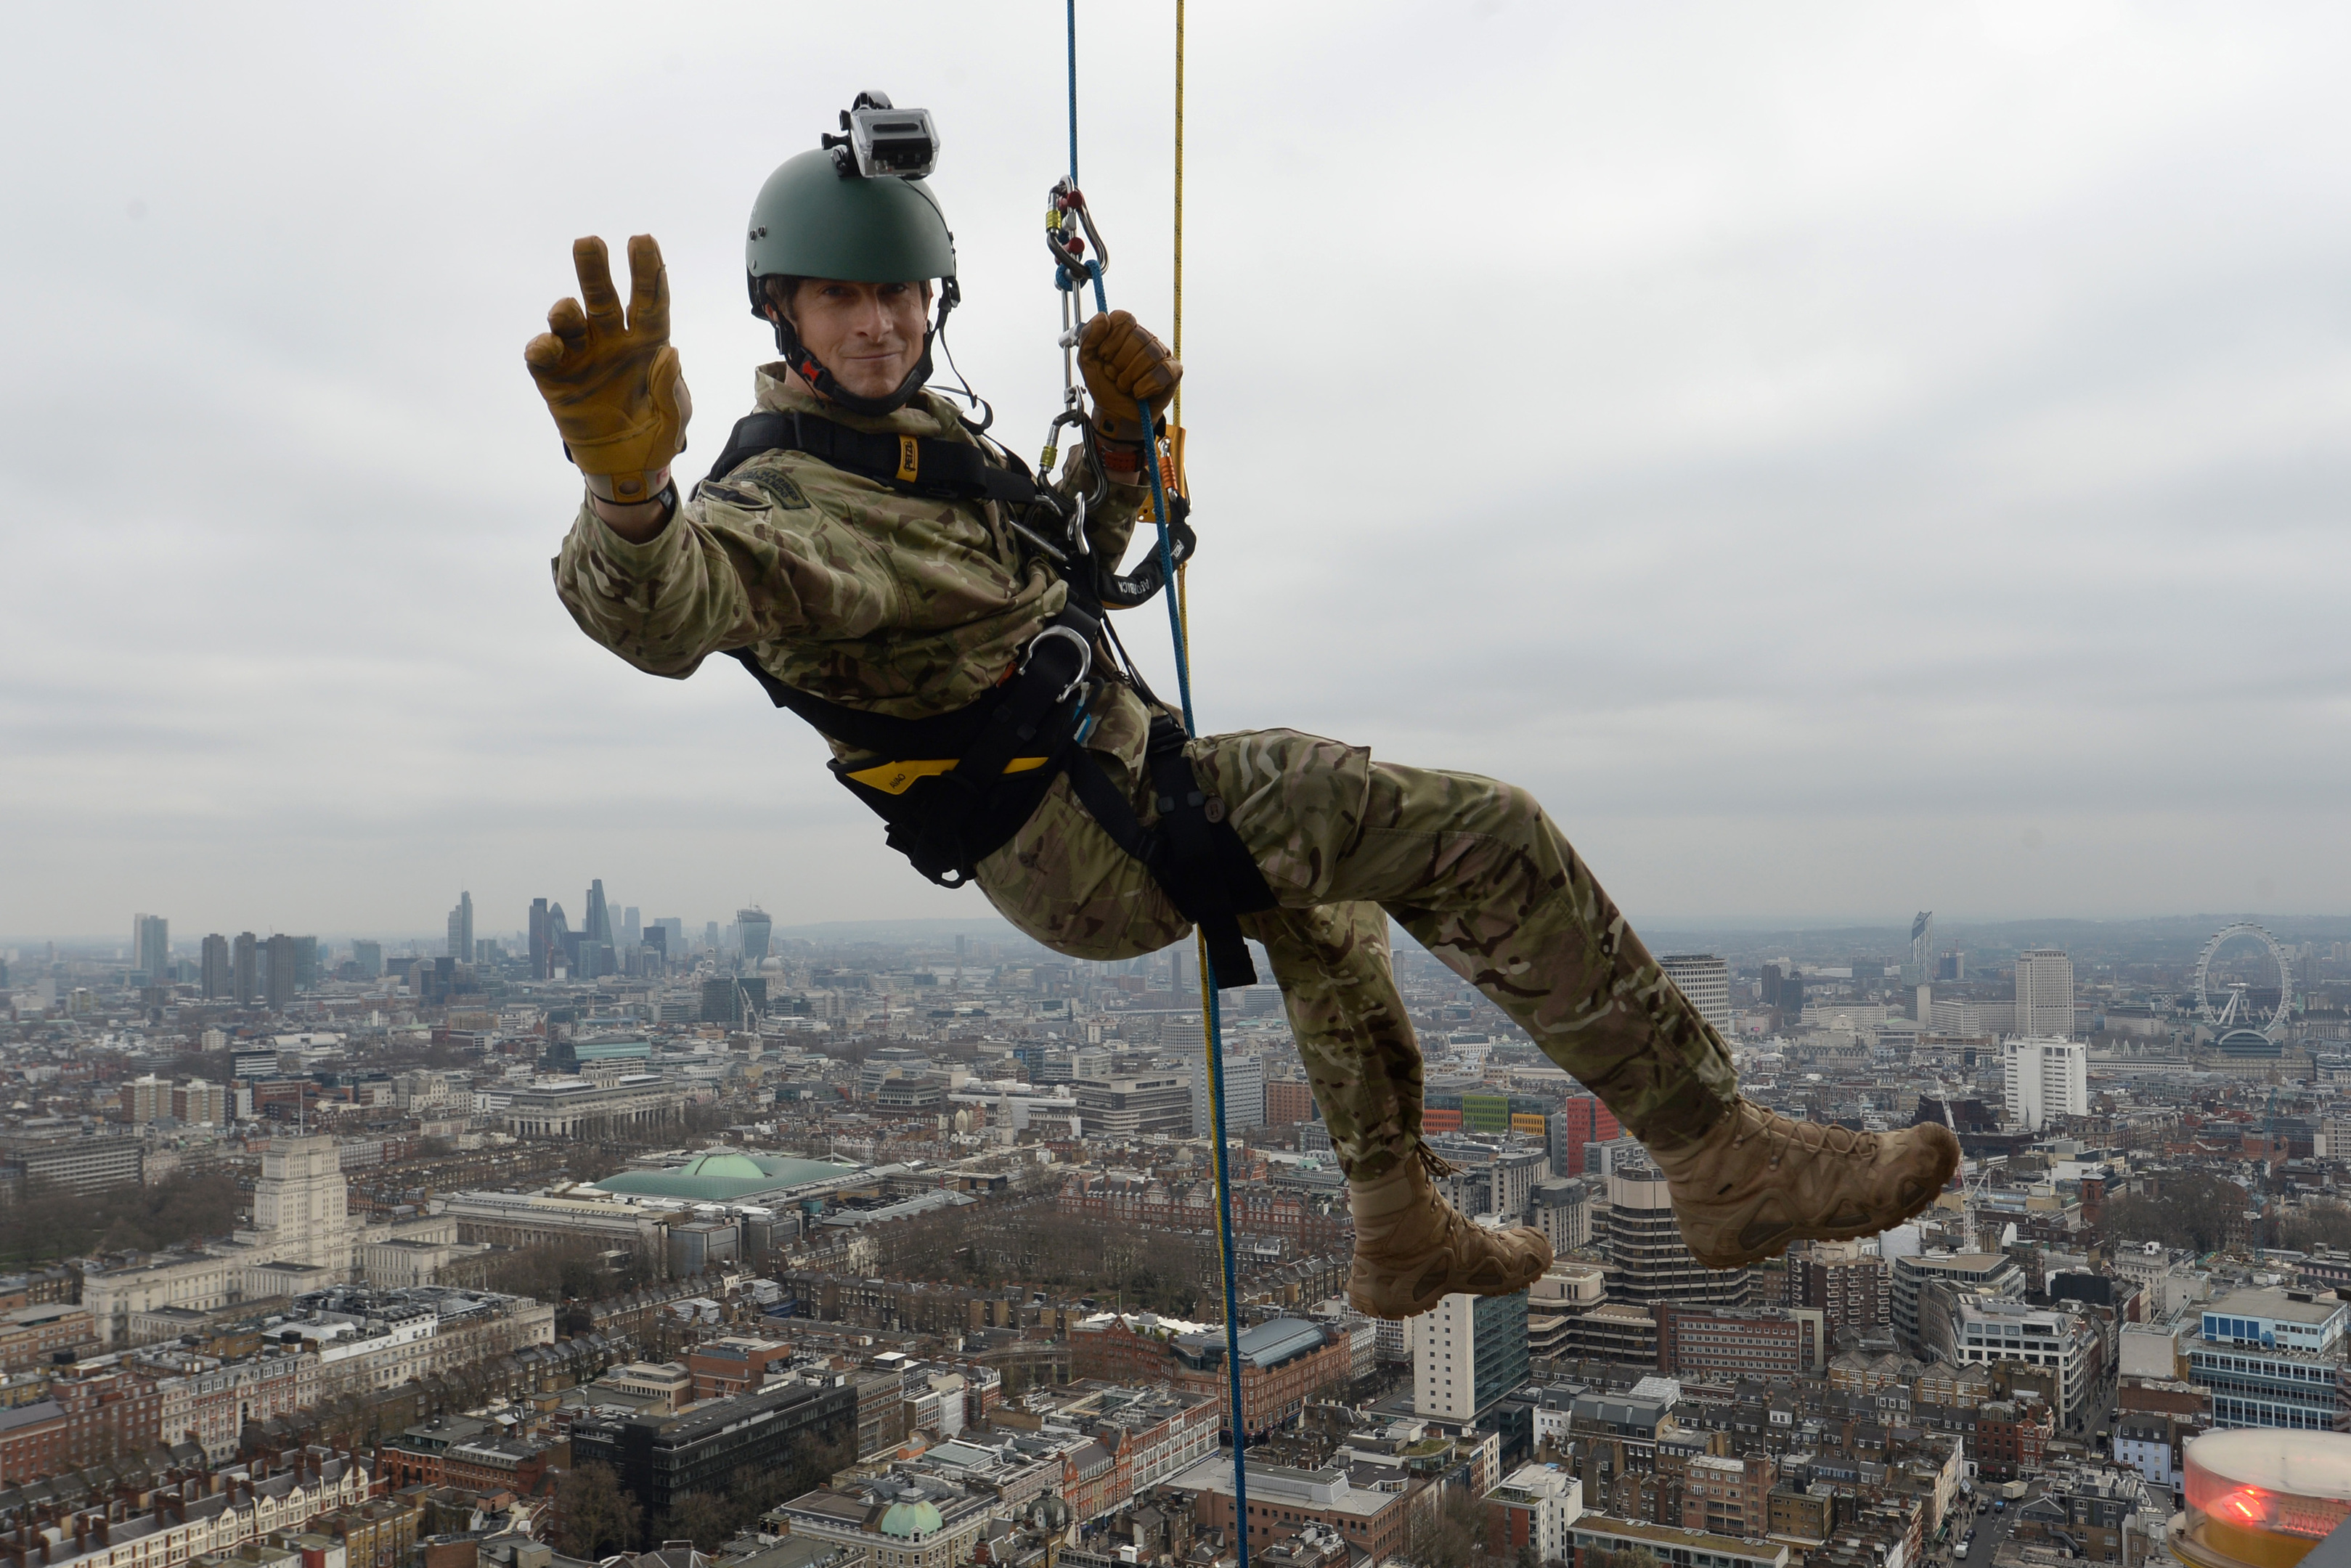 Bear Grylls abseils down the BT Tower in aid of Sport Relief and the Royal Marines Charitable Trust Fund, London.